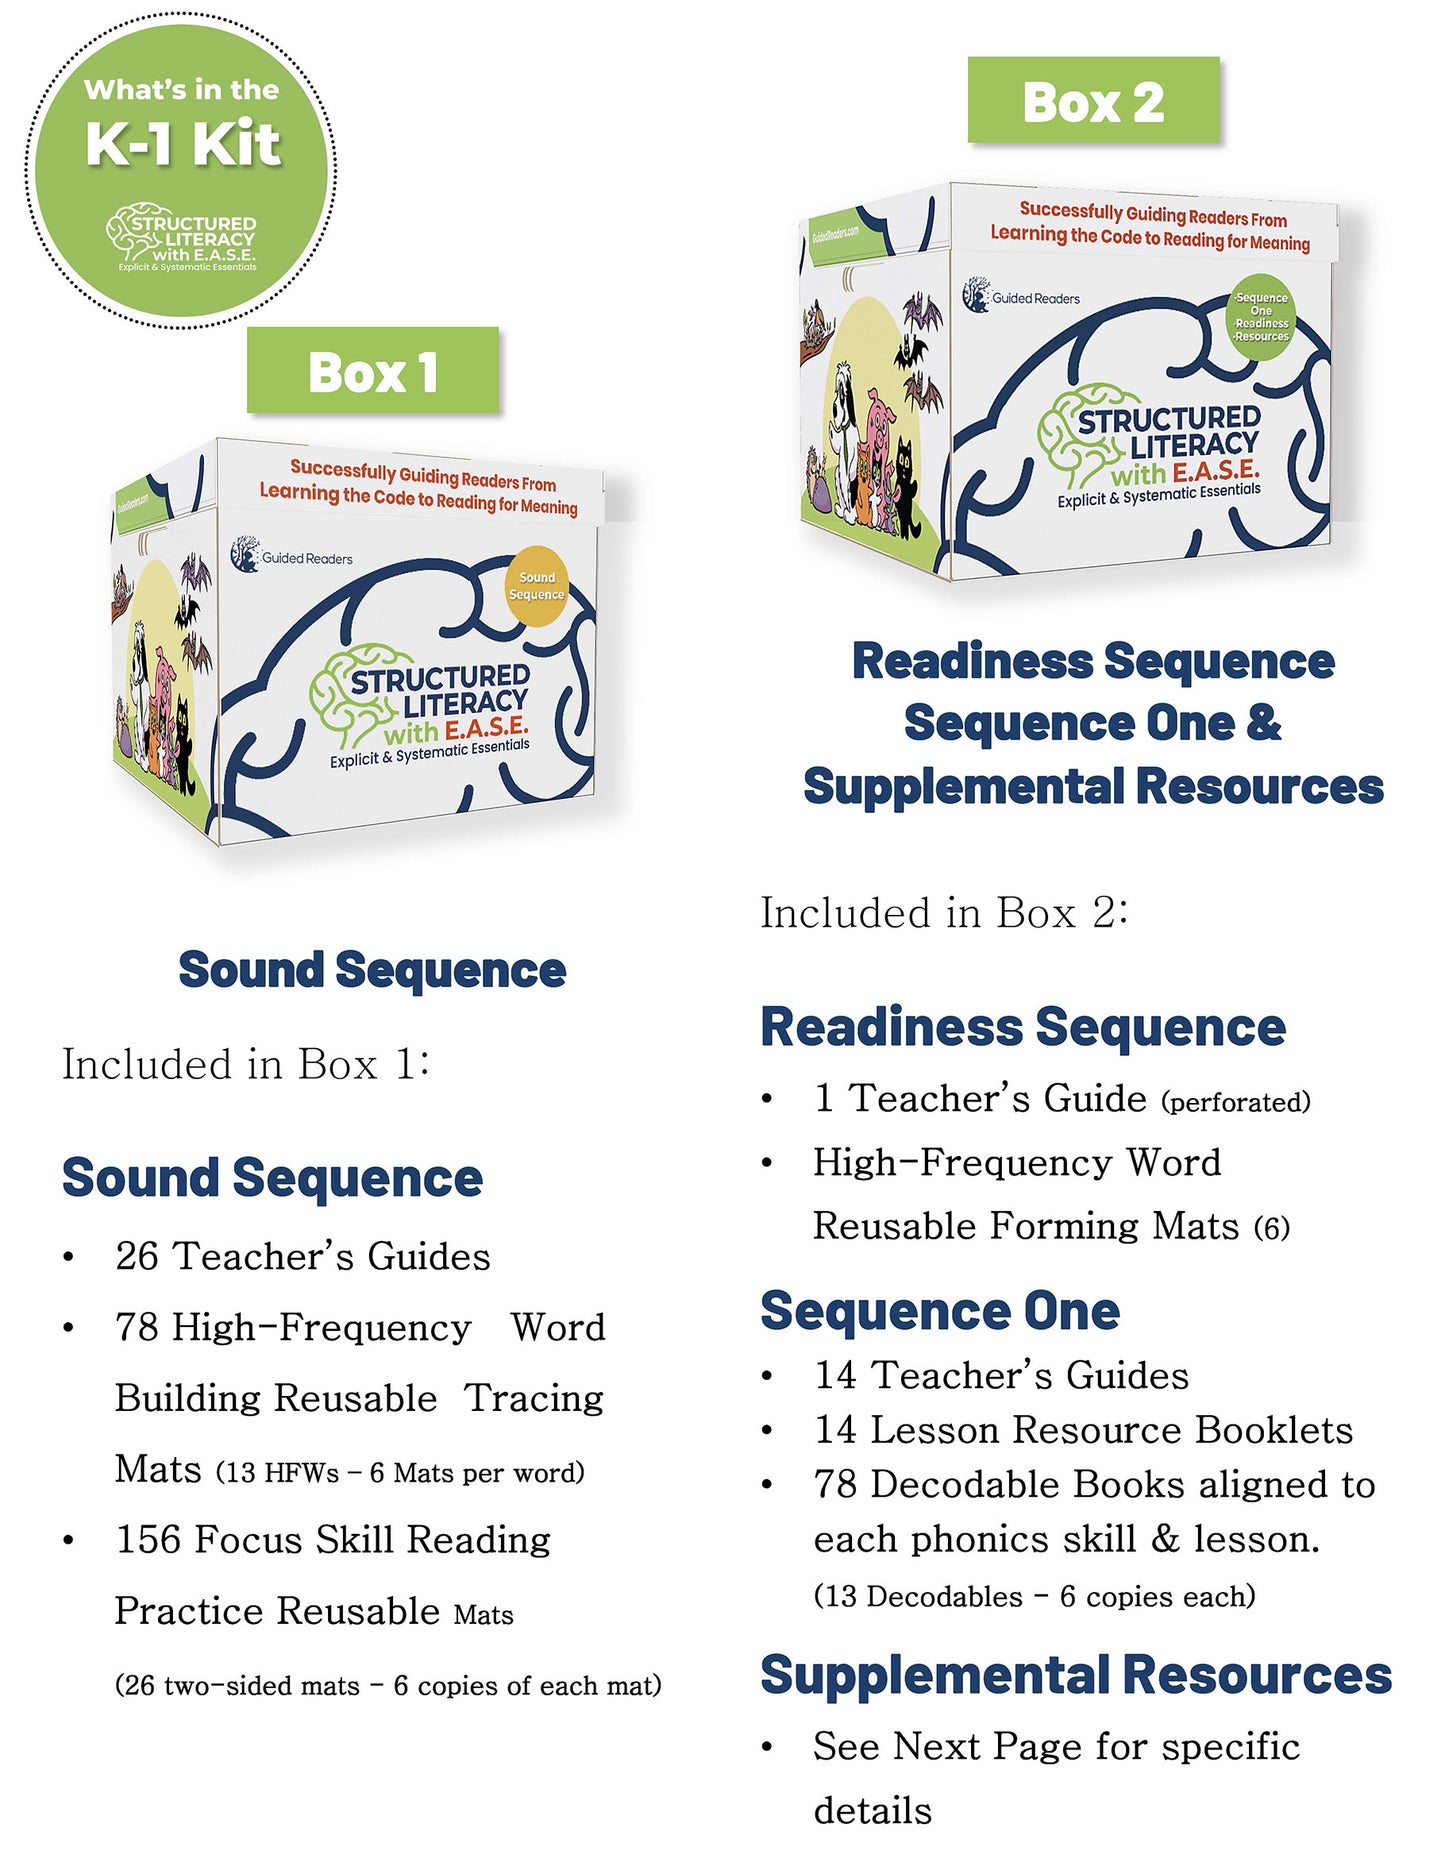 Structured Literacy with E.A.S.E | K-1 Kit